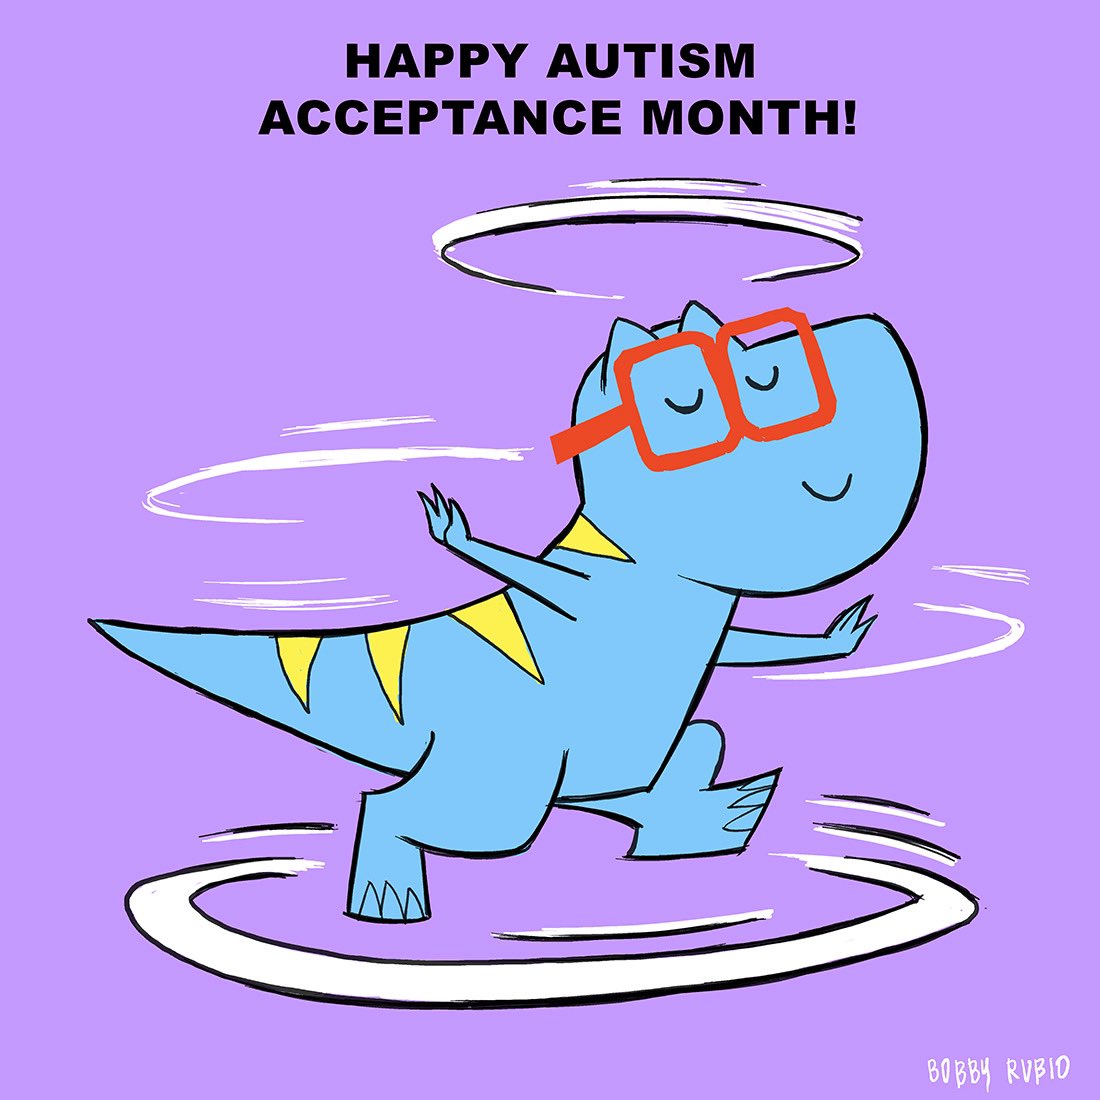 Happy #AutismAcceptanceMonth! Alex likes to spin. Many #Autistic people can learn to manage their #Stimming. It takes time, patience, love and understanding. #AlexTheDifferentDinosaur. #AlexAllosaurus My #AutismJourney. WE’re in this together. You are not alone. 💙💛❤️♾️